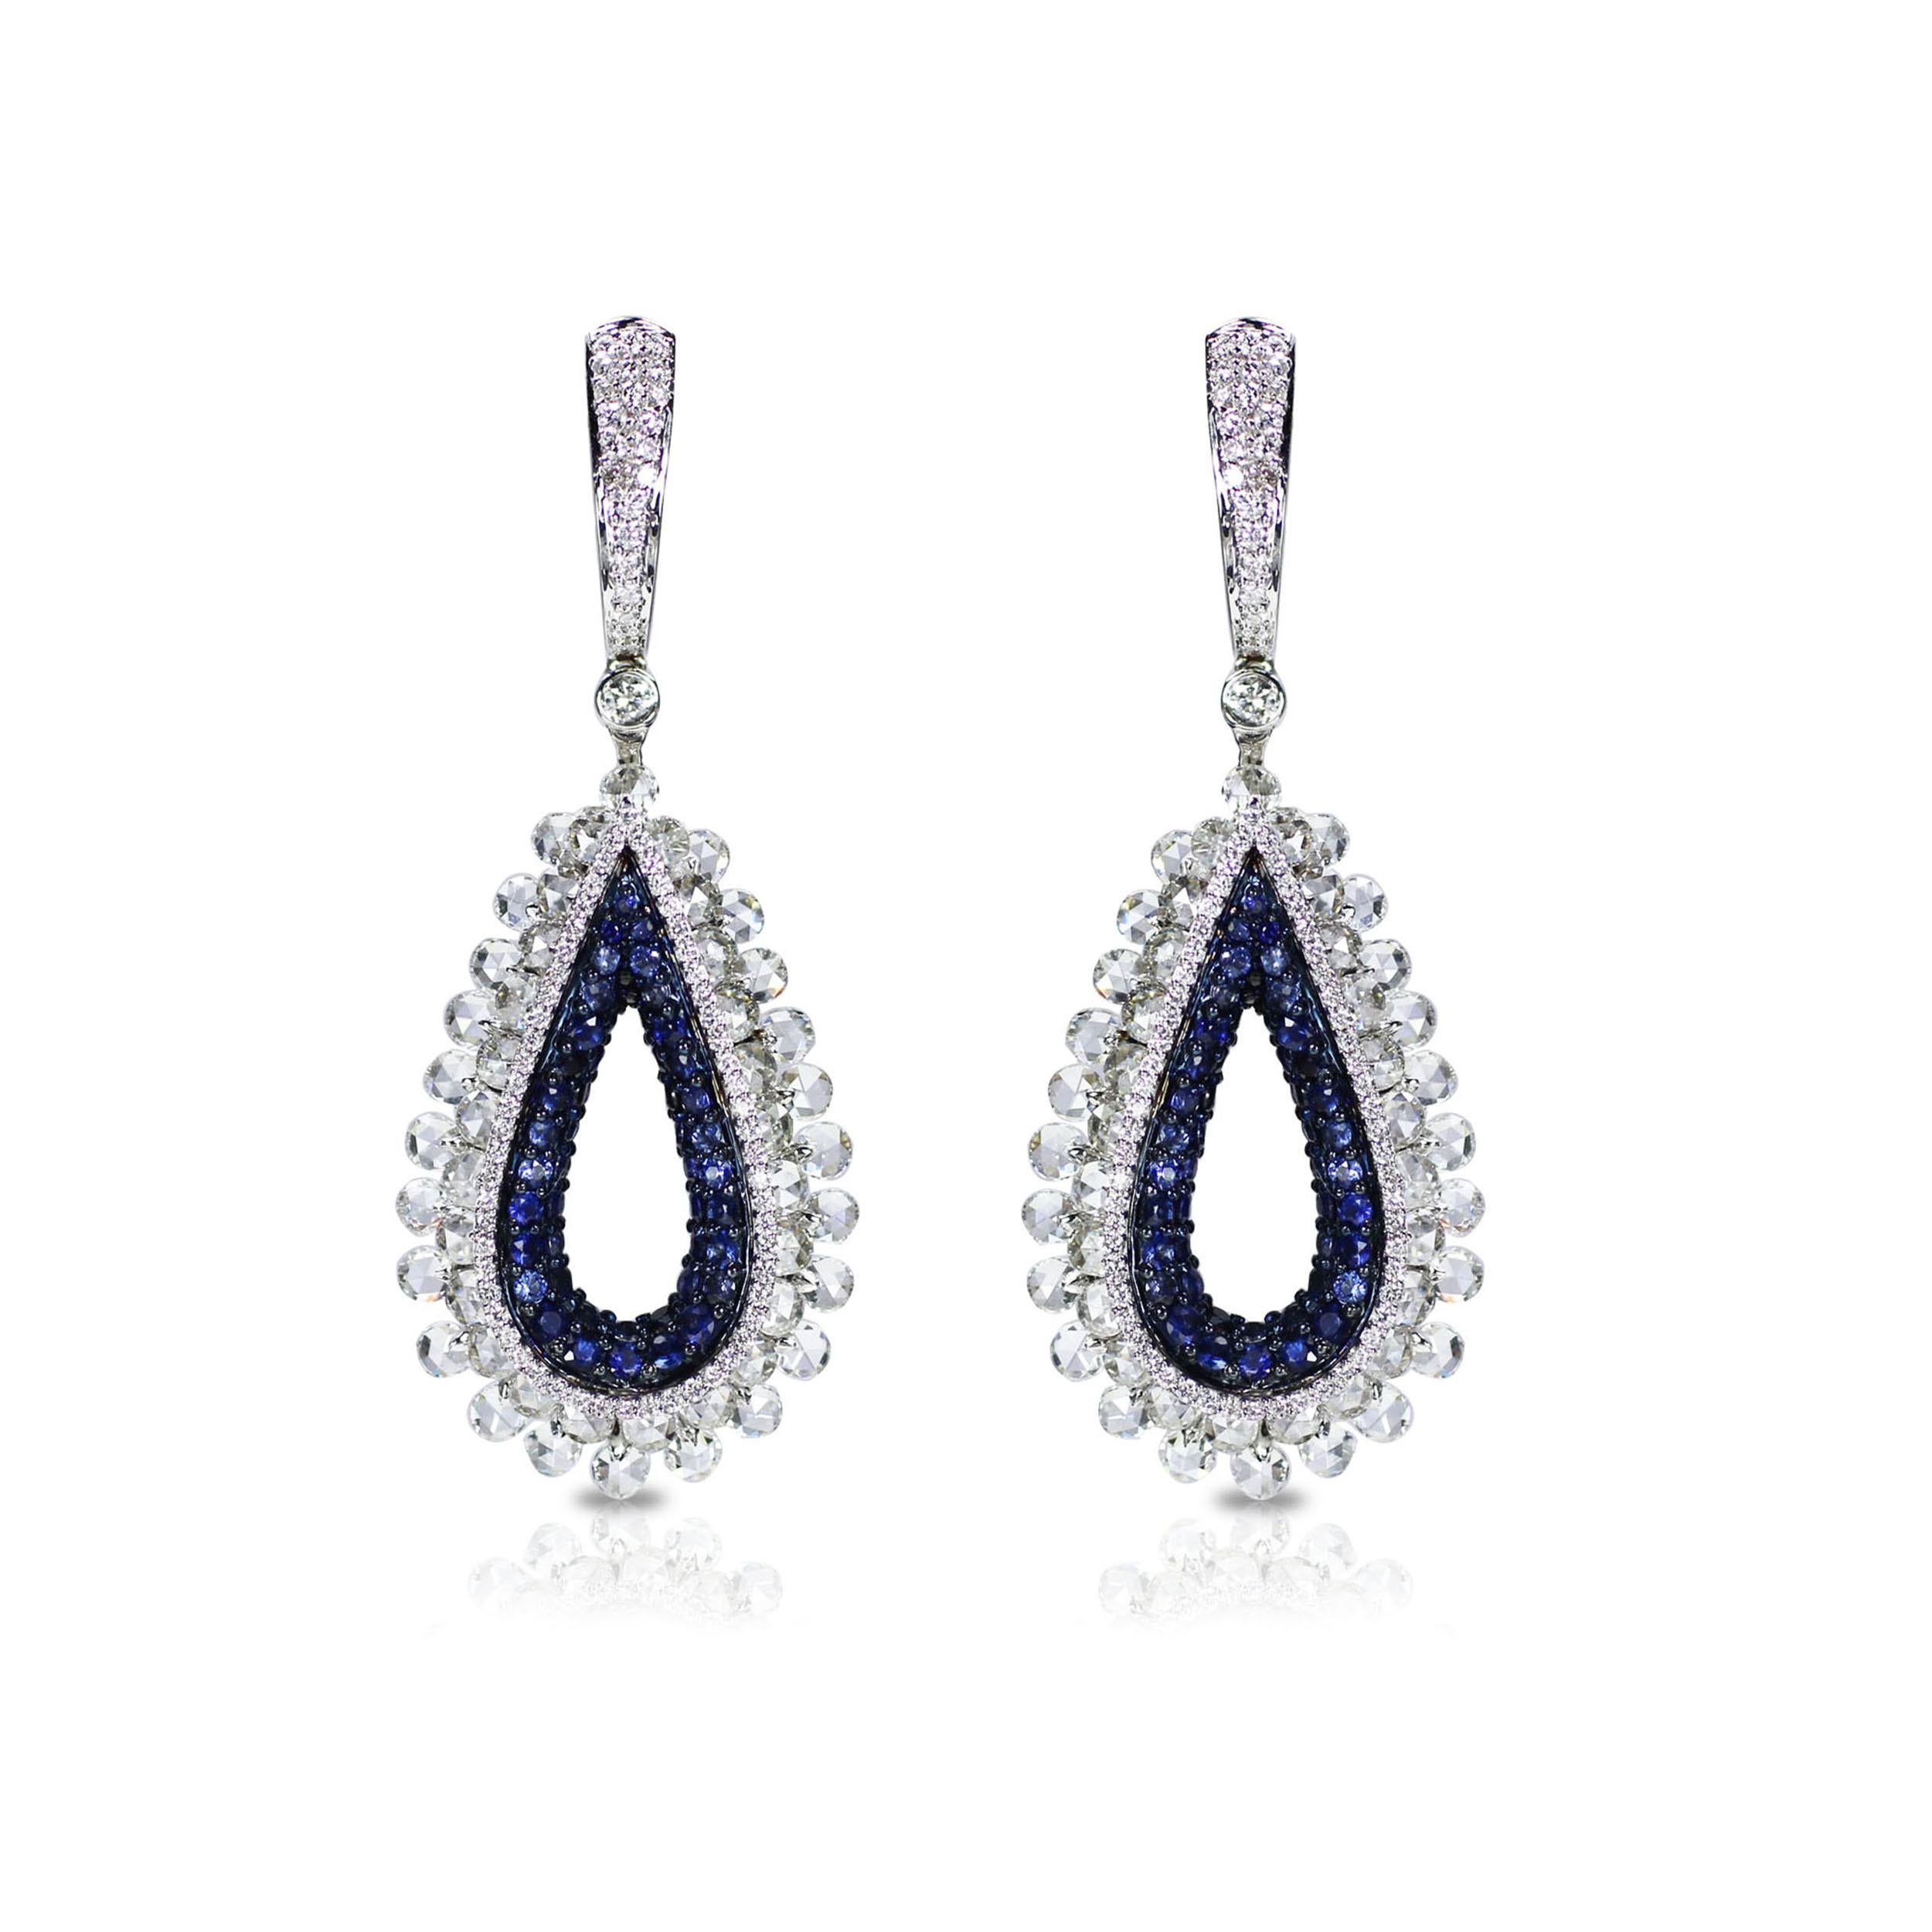 Brilliant cut and rosecut diamond and blue sapphire earrings

This teardrop-shaped pair of 18K white gold earrings featuring brilliant cut and rosecut diamonds will become a treasured part of your jewelry collection almost instantly. Adding charm to